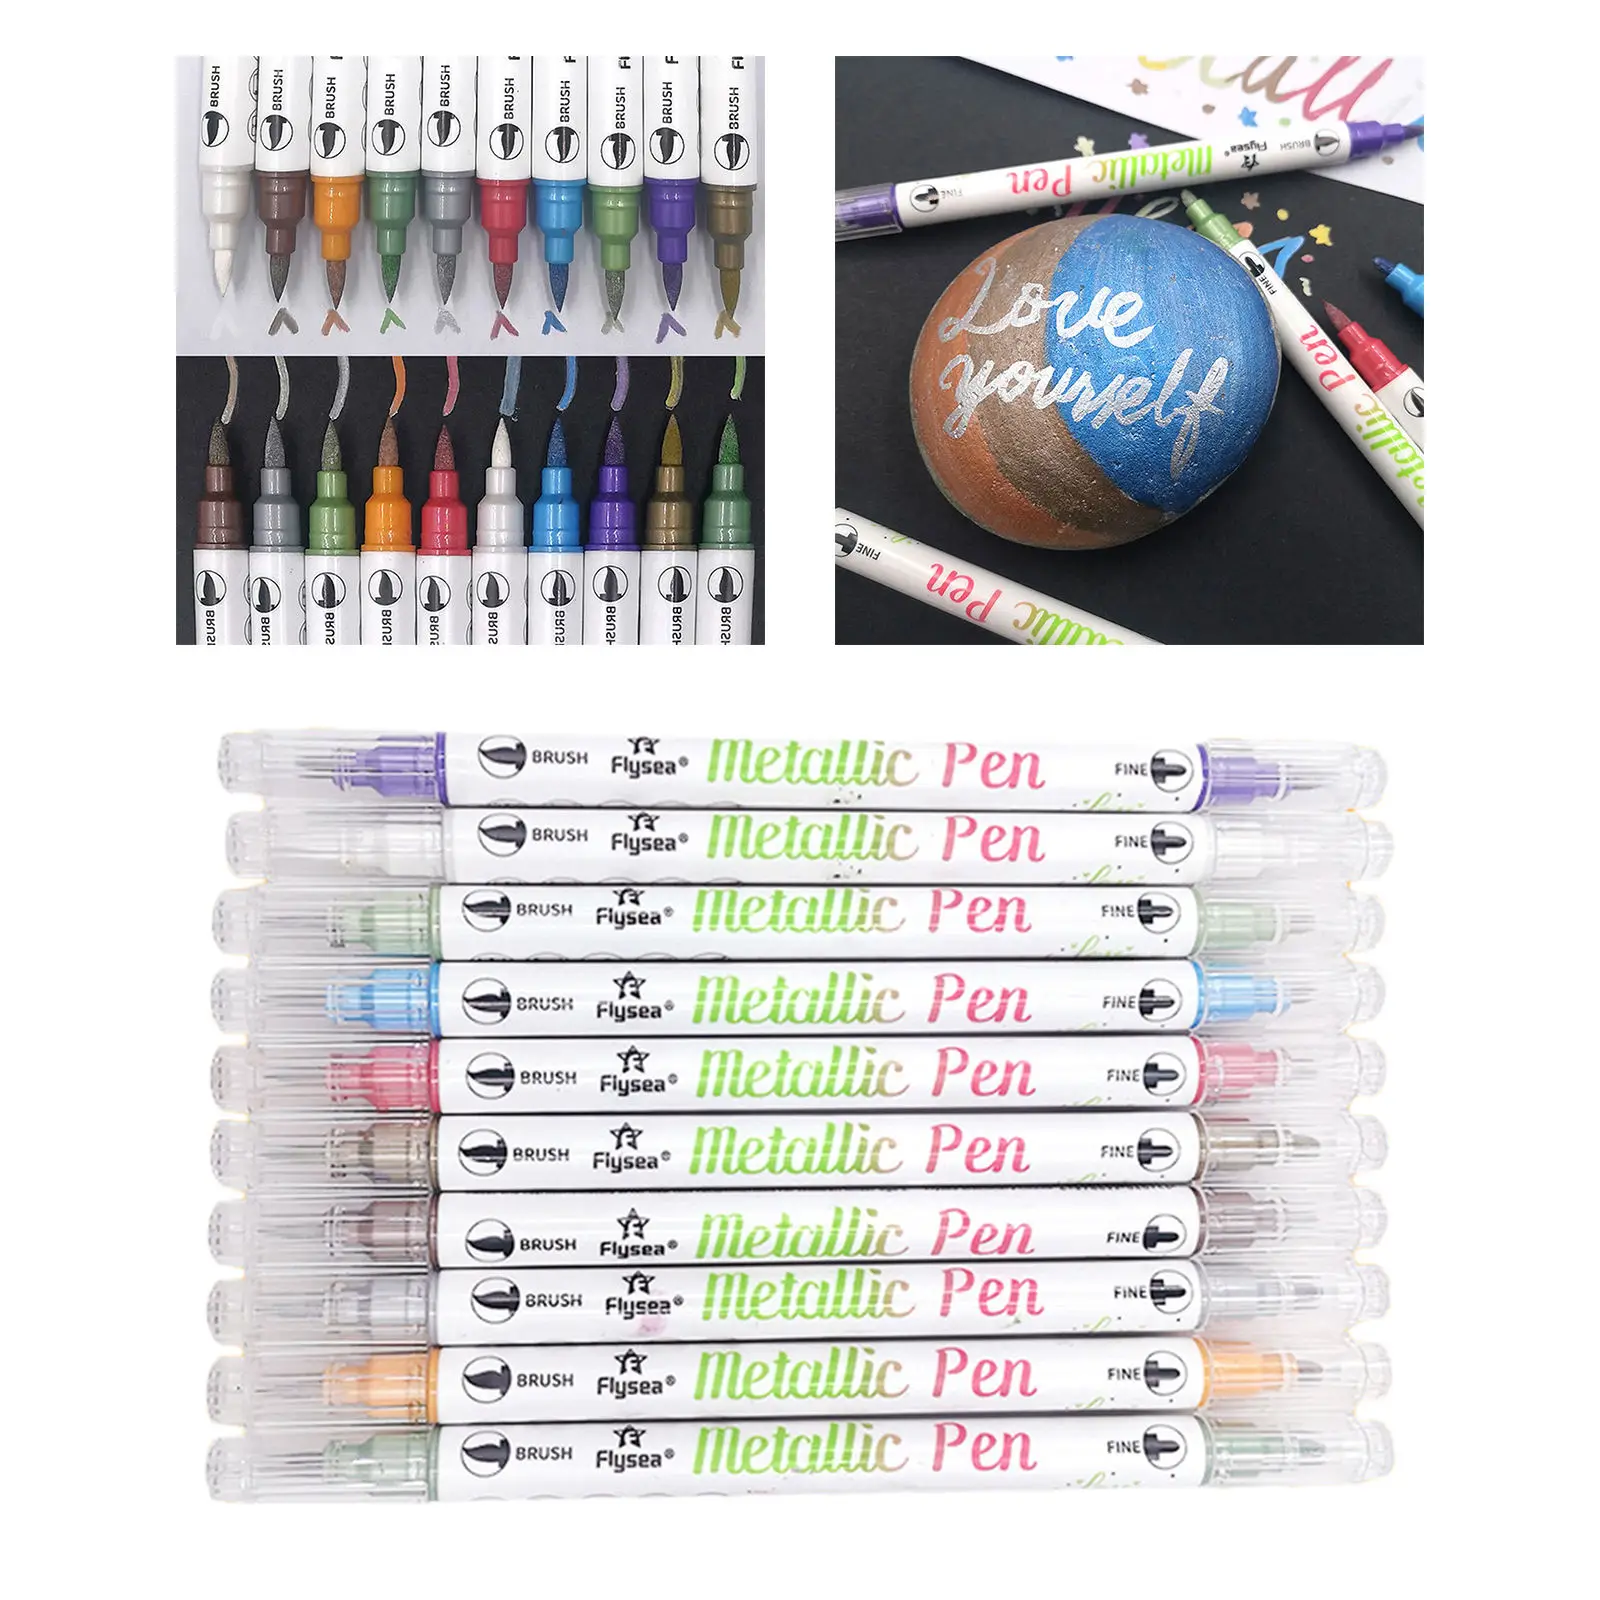 10Pcs Markers Pens Graffiti Shimmer Double Head Paint Pens for Painting Easter Eggs